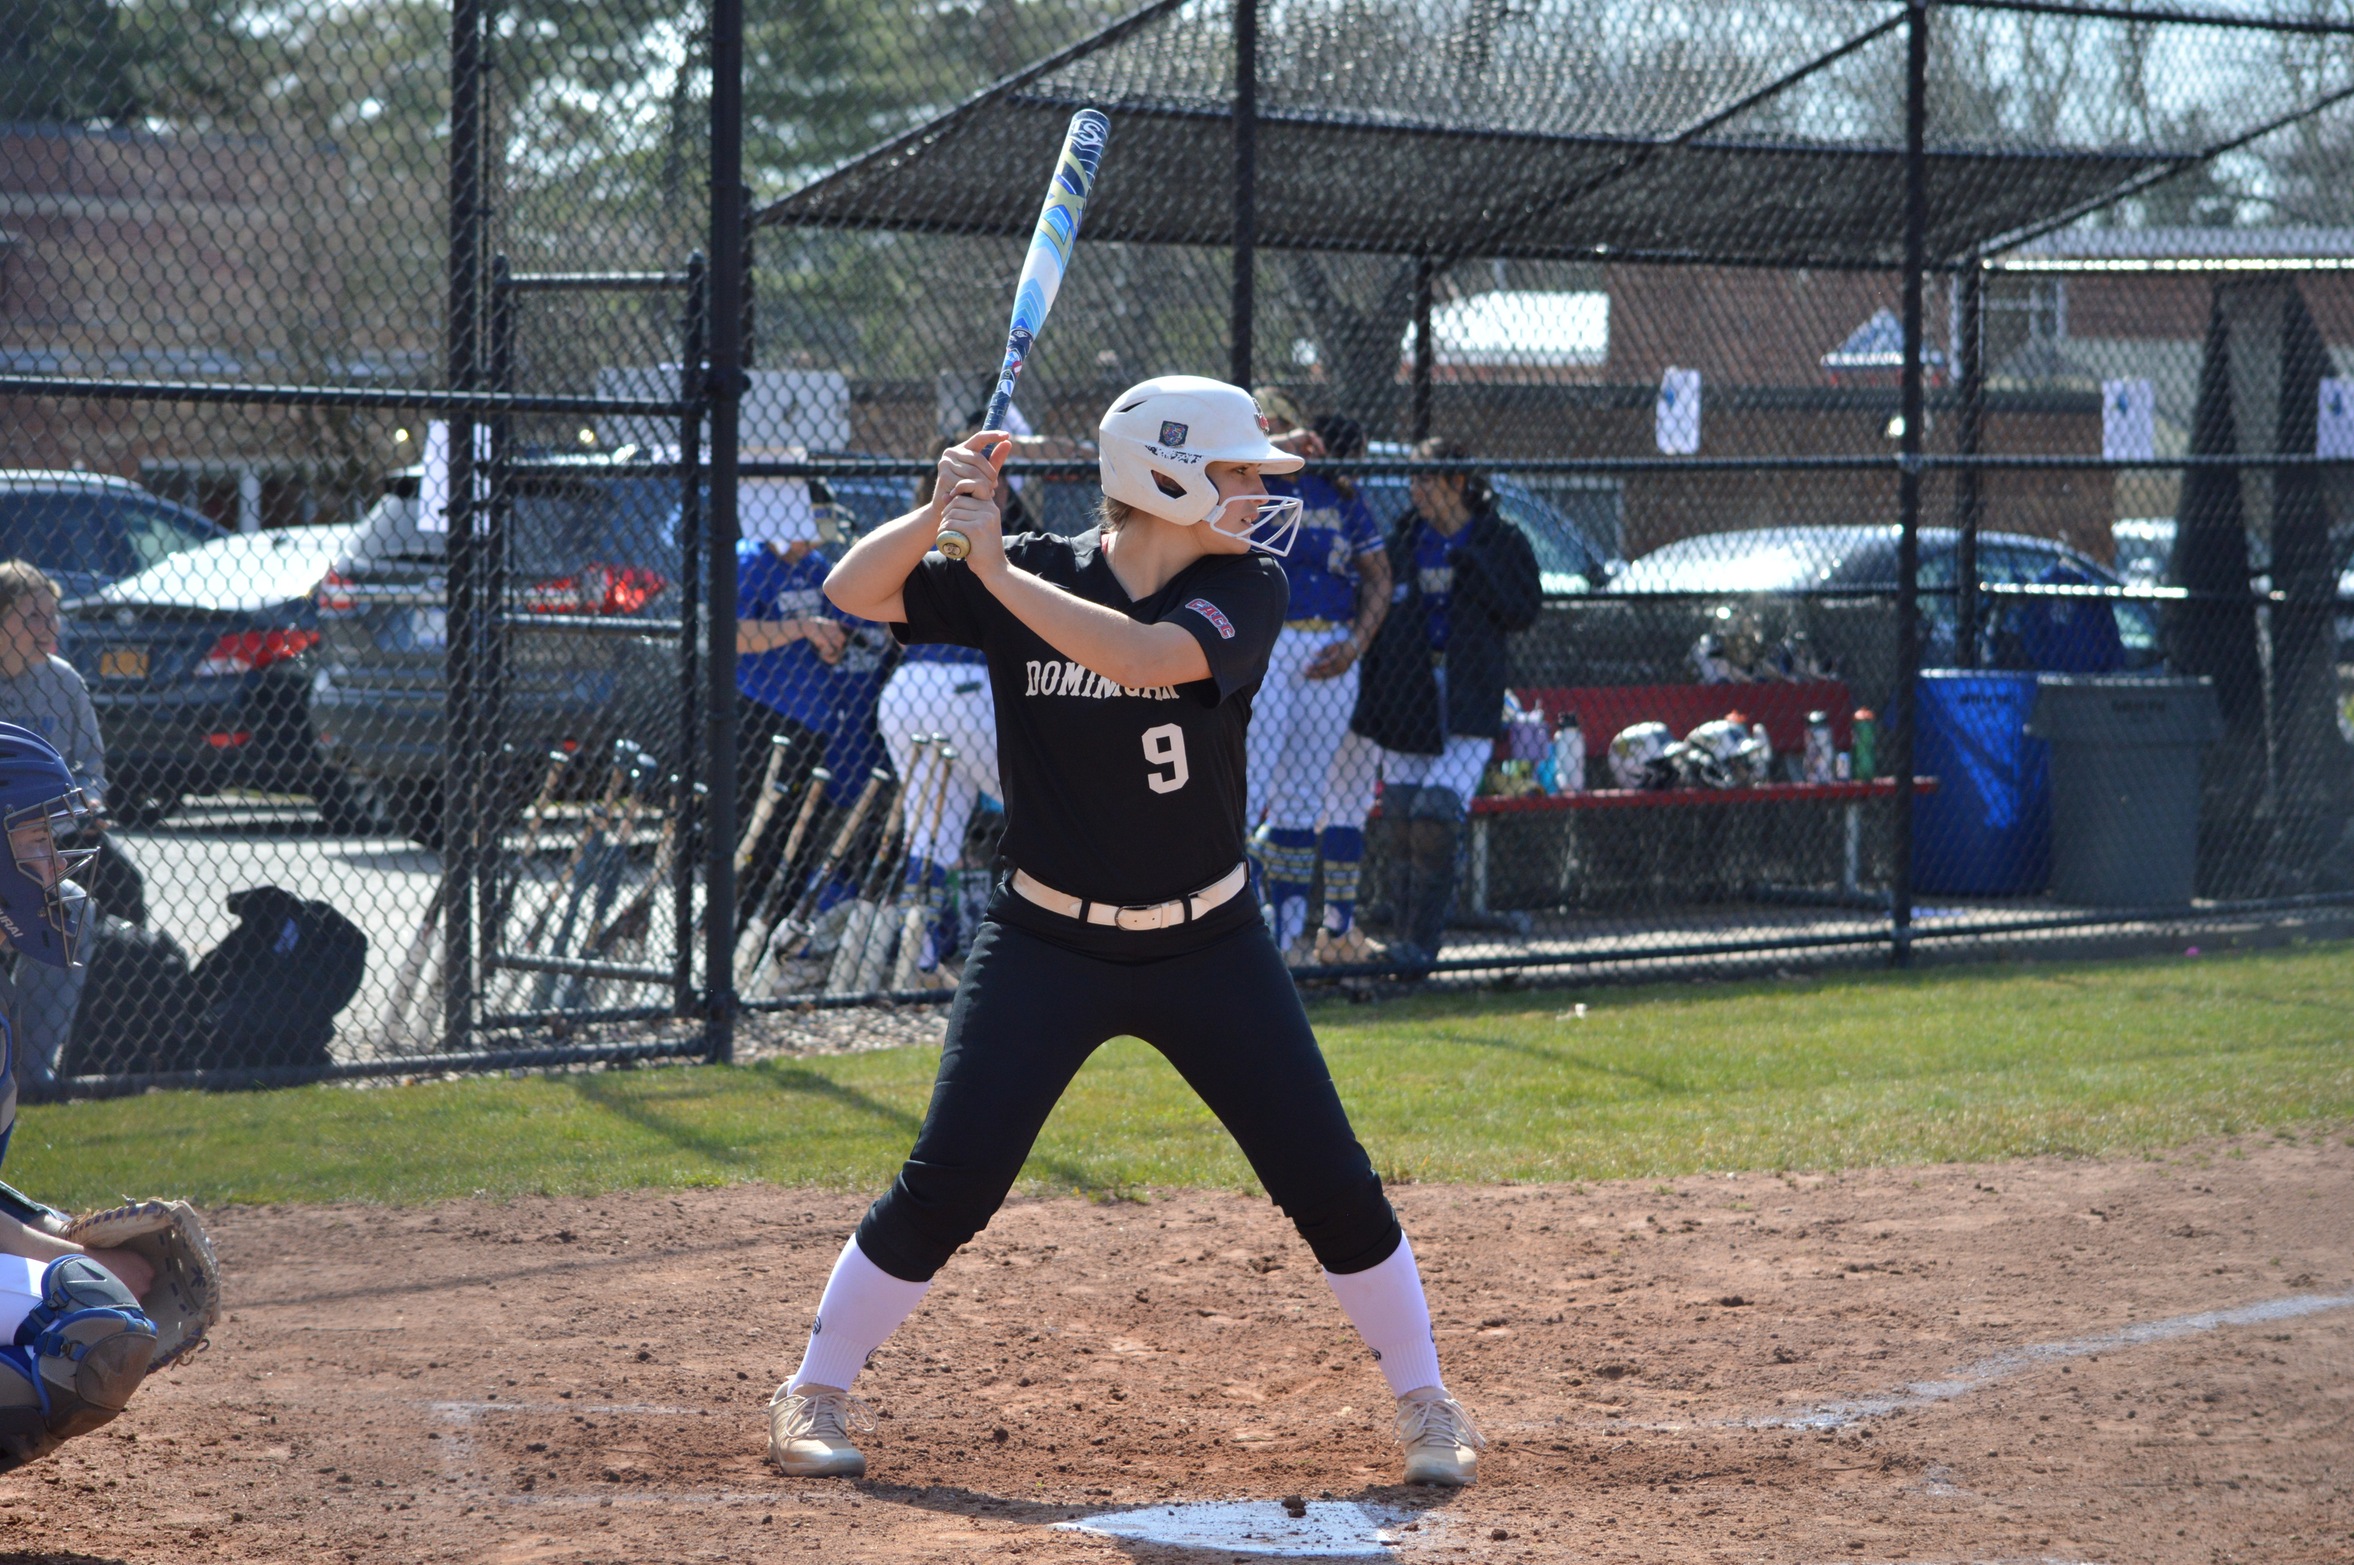 GAME TWO RALLY FALLS SHORT AS GOLDEN FALCONS TAKE TWO FROM LADY CHARGERS